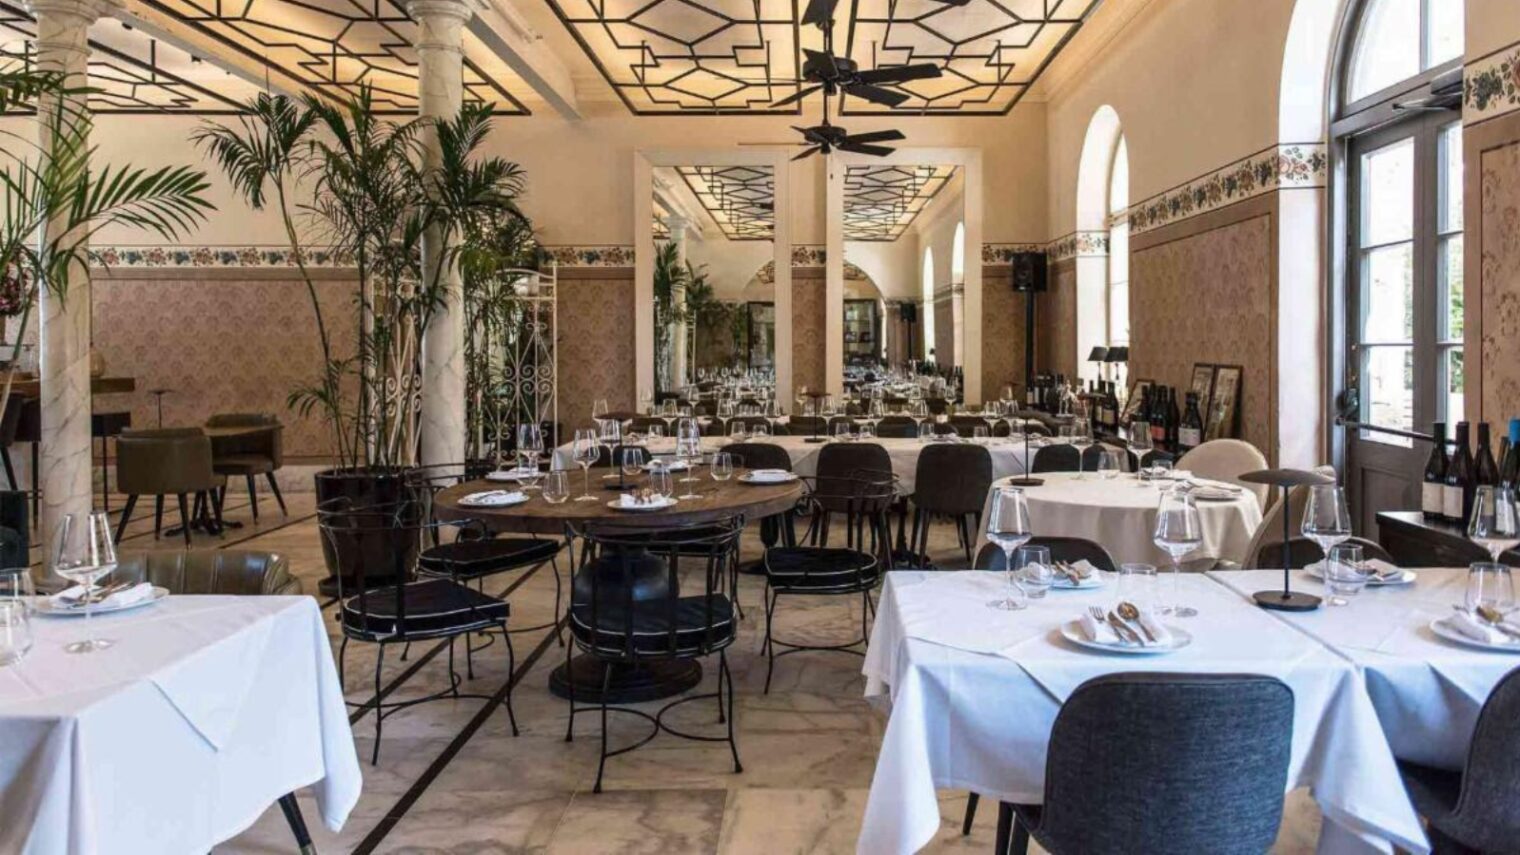 The George & John restaurant in Tel Aviv’s Drisco Hotel may be up for a Michelin star. Photo courtesy of Drisco Hotel